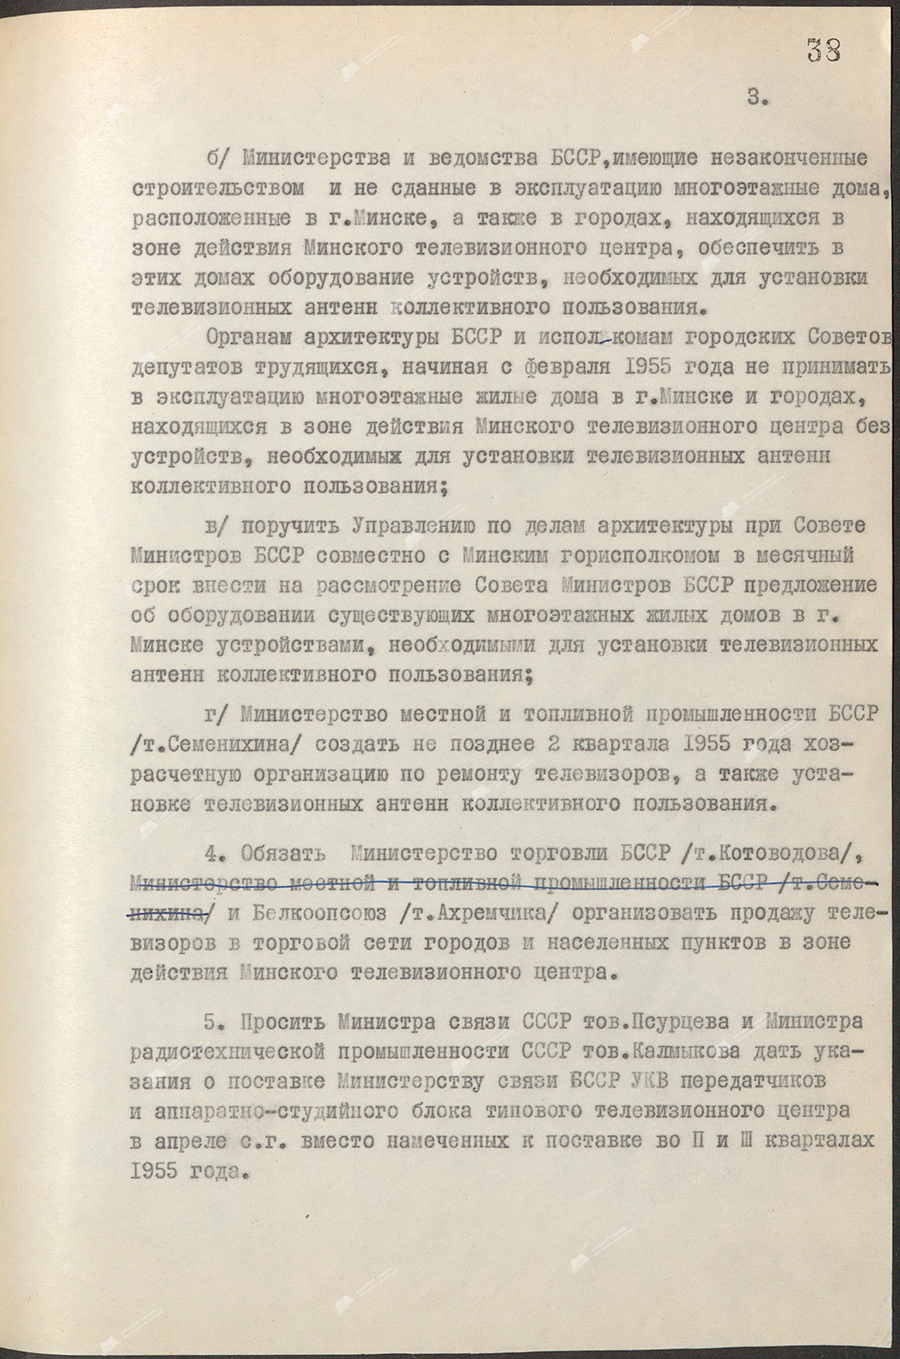 Resolution No. 65 of the Council of Ministers of the BSSR and the Central Committee of the Communist Party of Belarus «On the launch of the first stage of the Minsk Television Center»-стр. 2